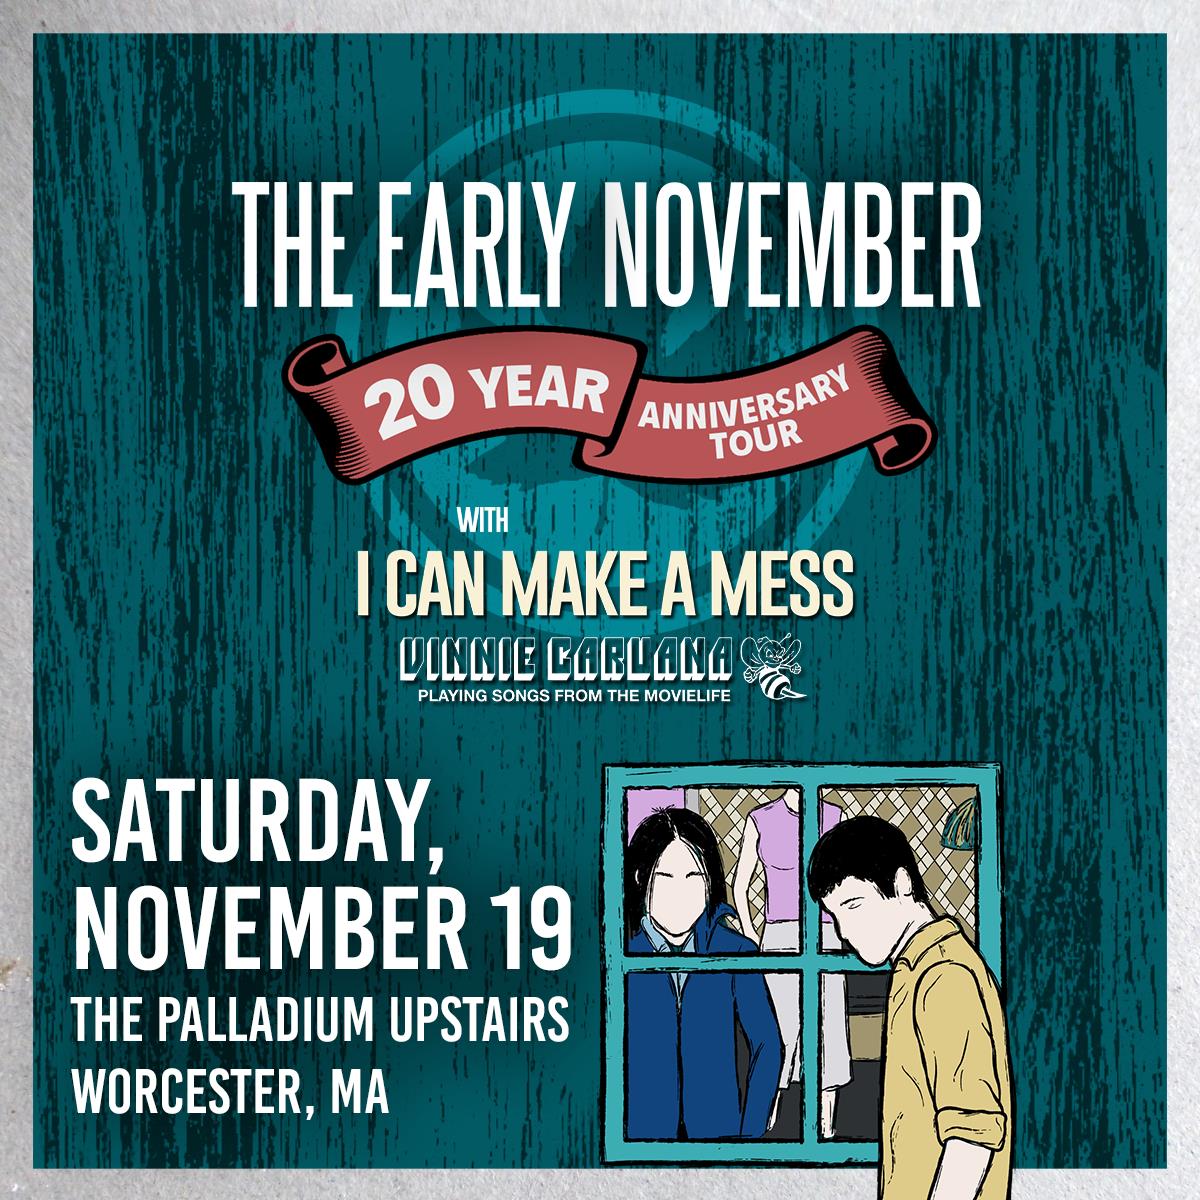 Buy Tickets to The Early November 20 Year Anniversary Tour in